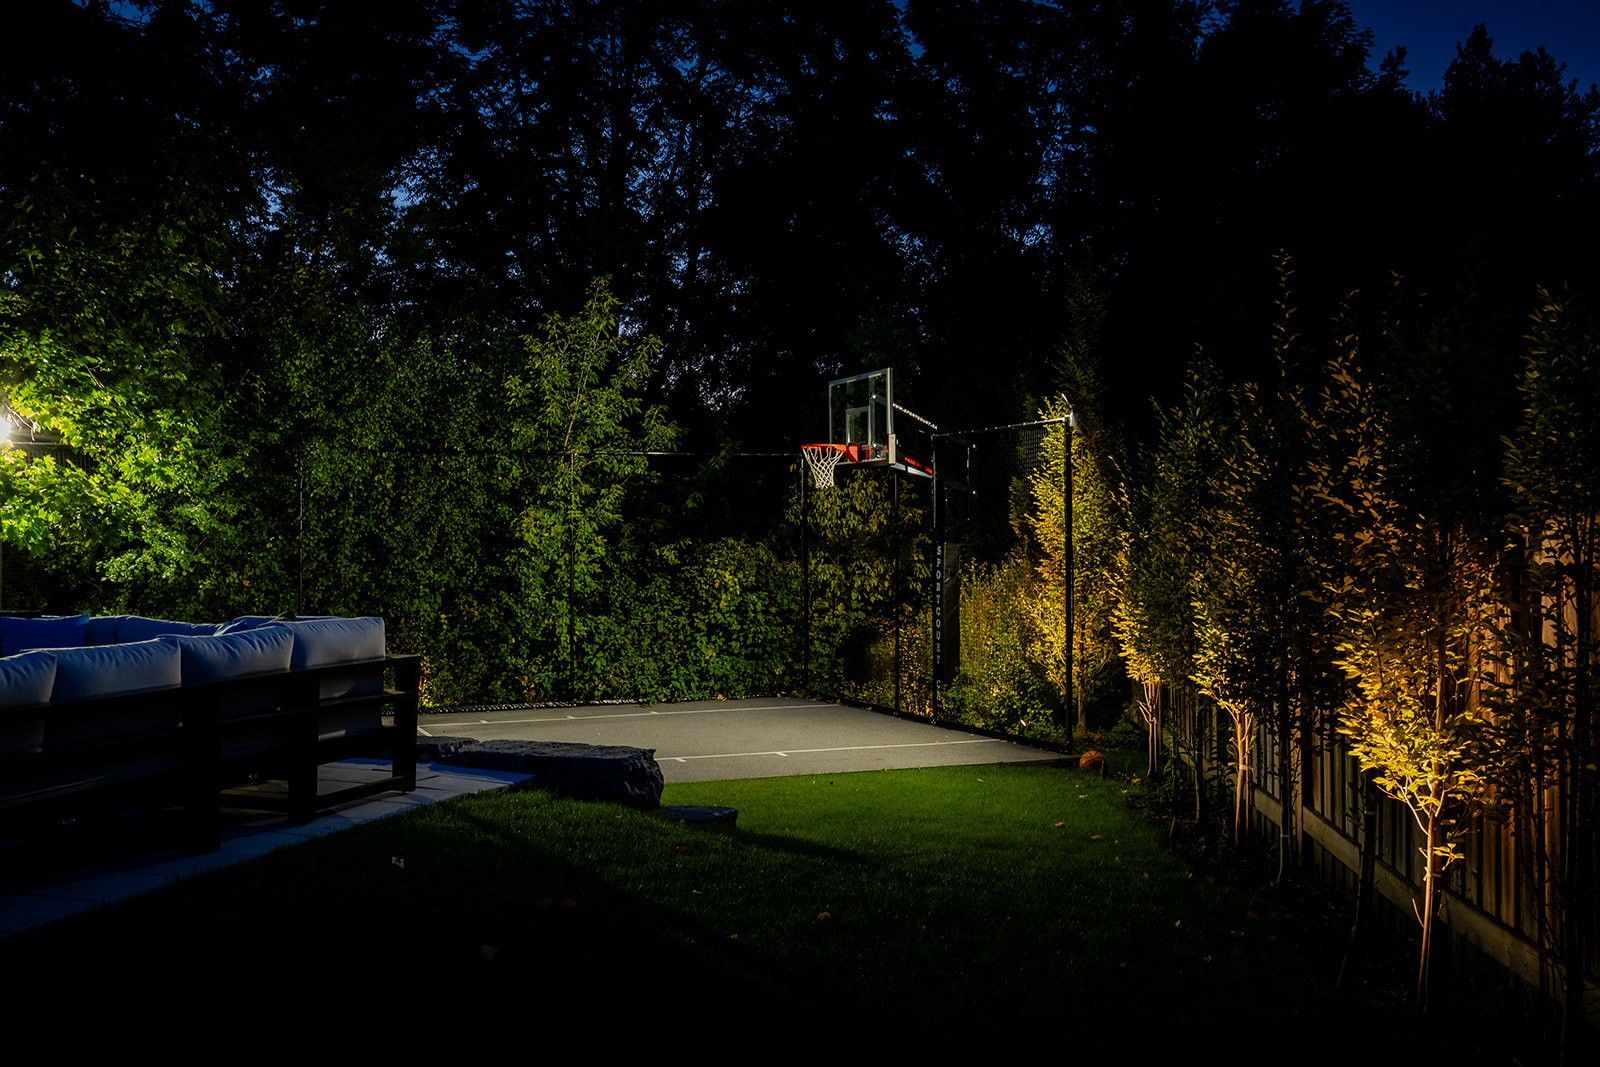 A practice basketball court lit up in the dark outside in the backyard.